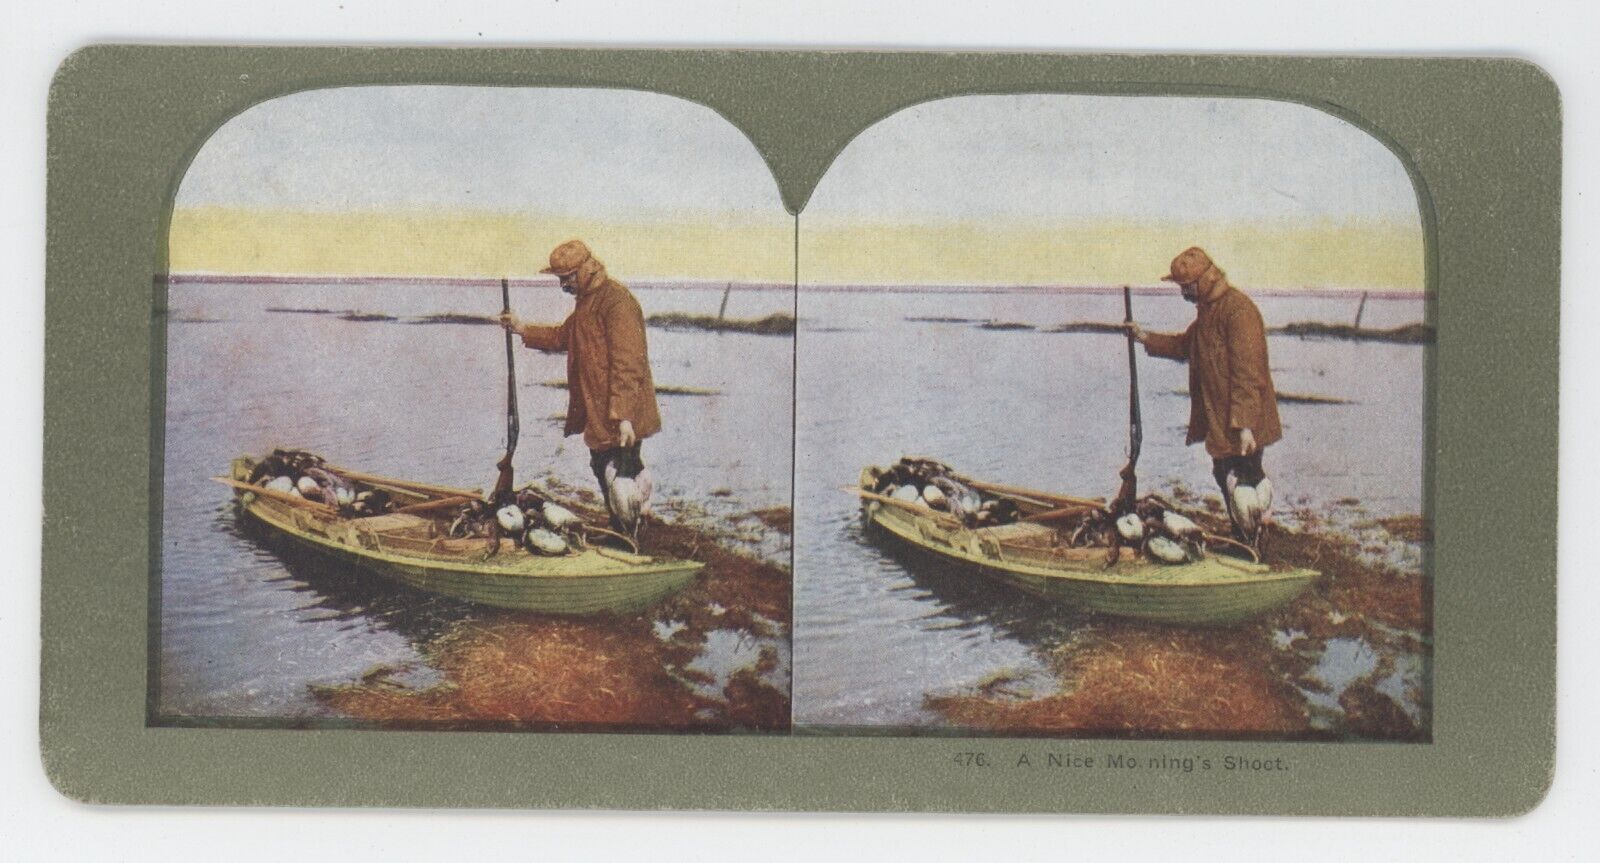 c1900's Colorized Stereoview A Nice Morning's Shoot. Hunter with Ducks in Boat